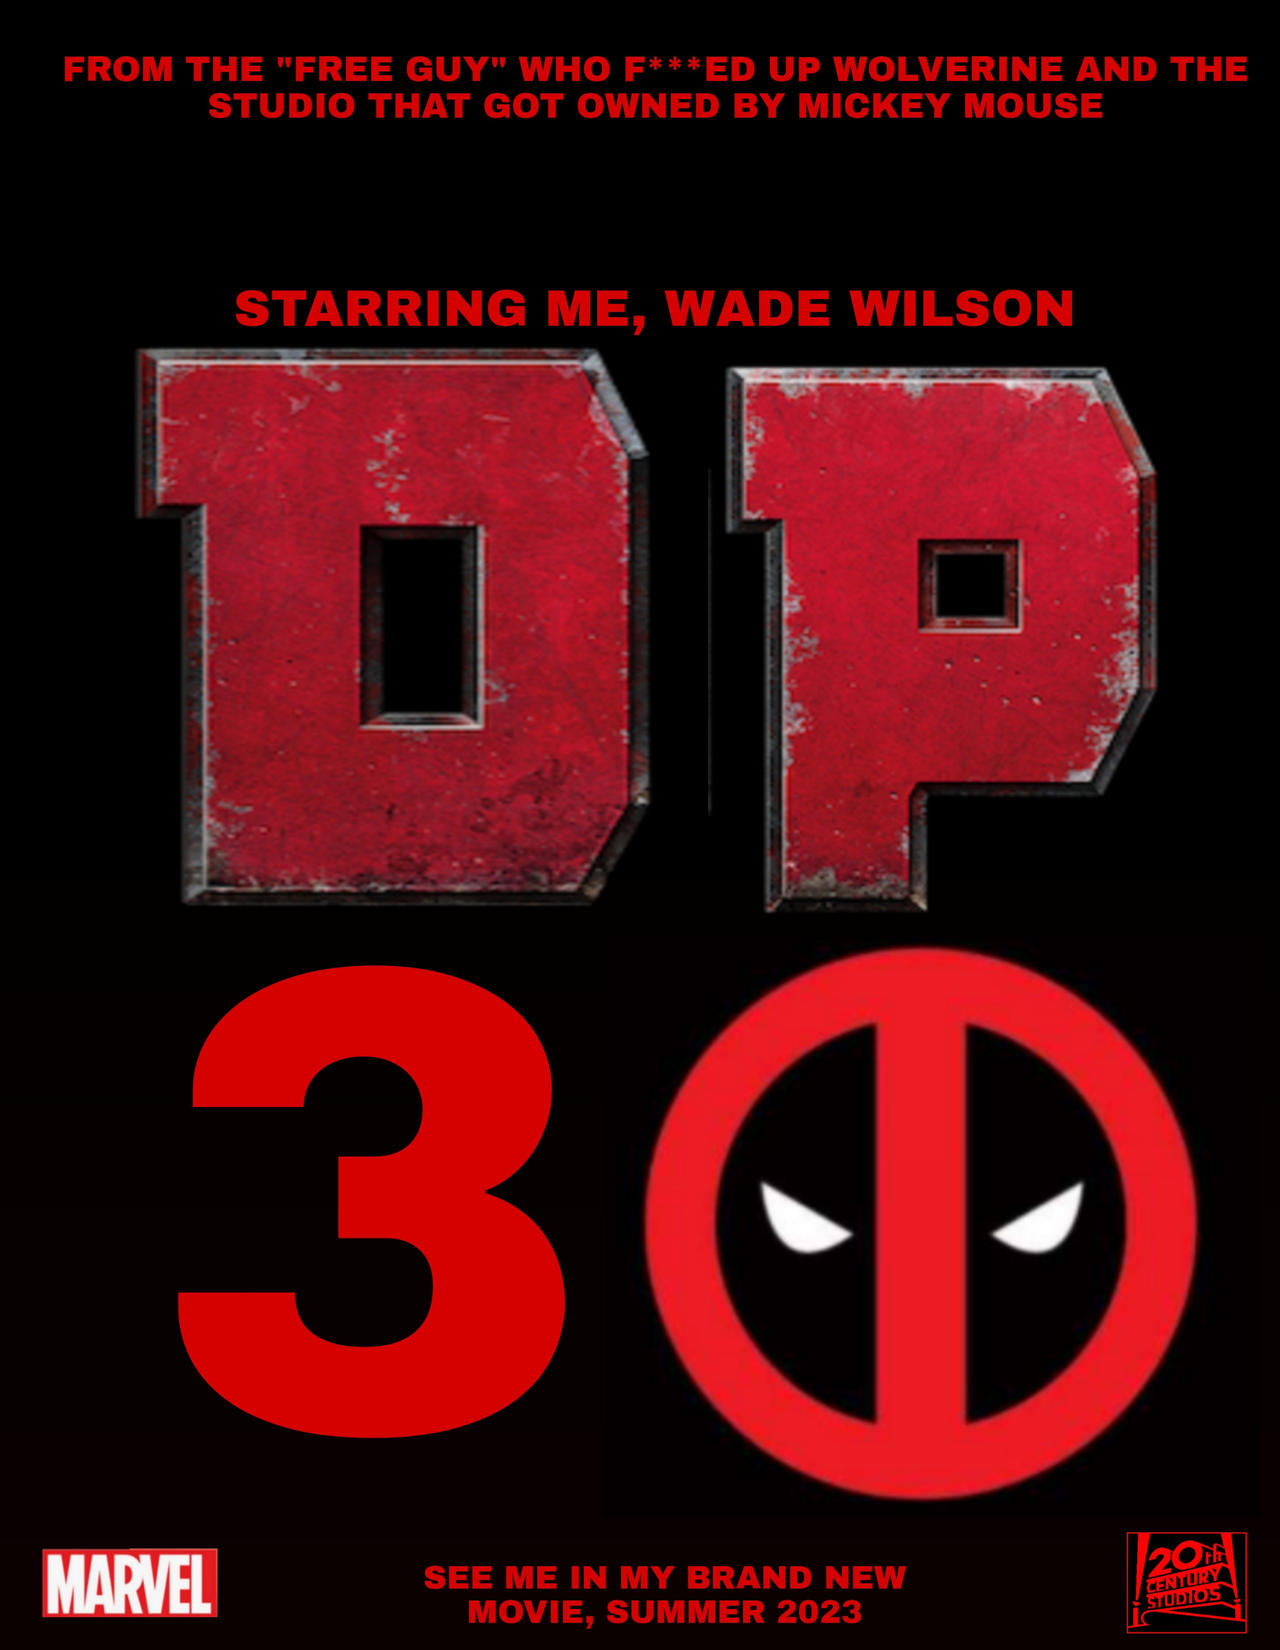 Second Life Marketplace - Movie poster-Deadpool 3